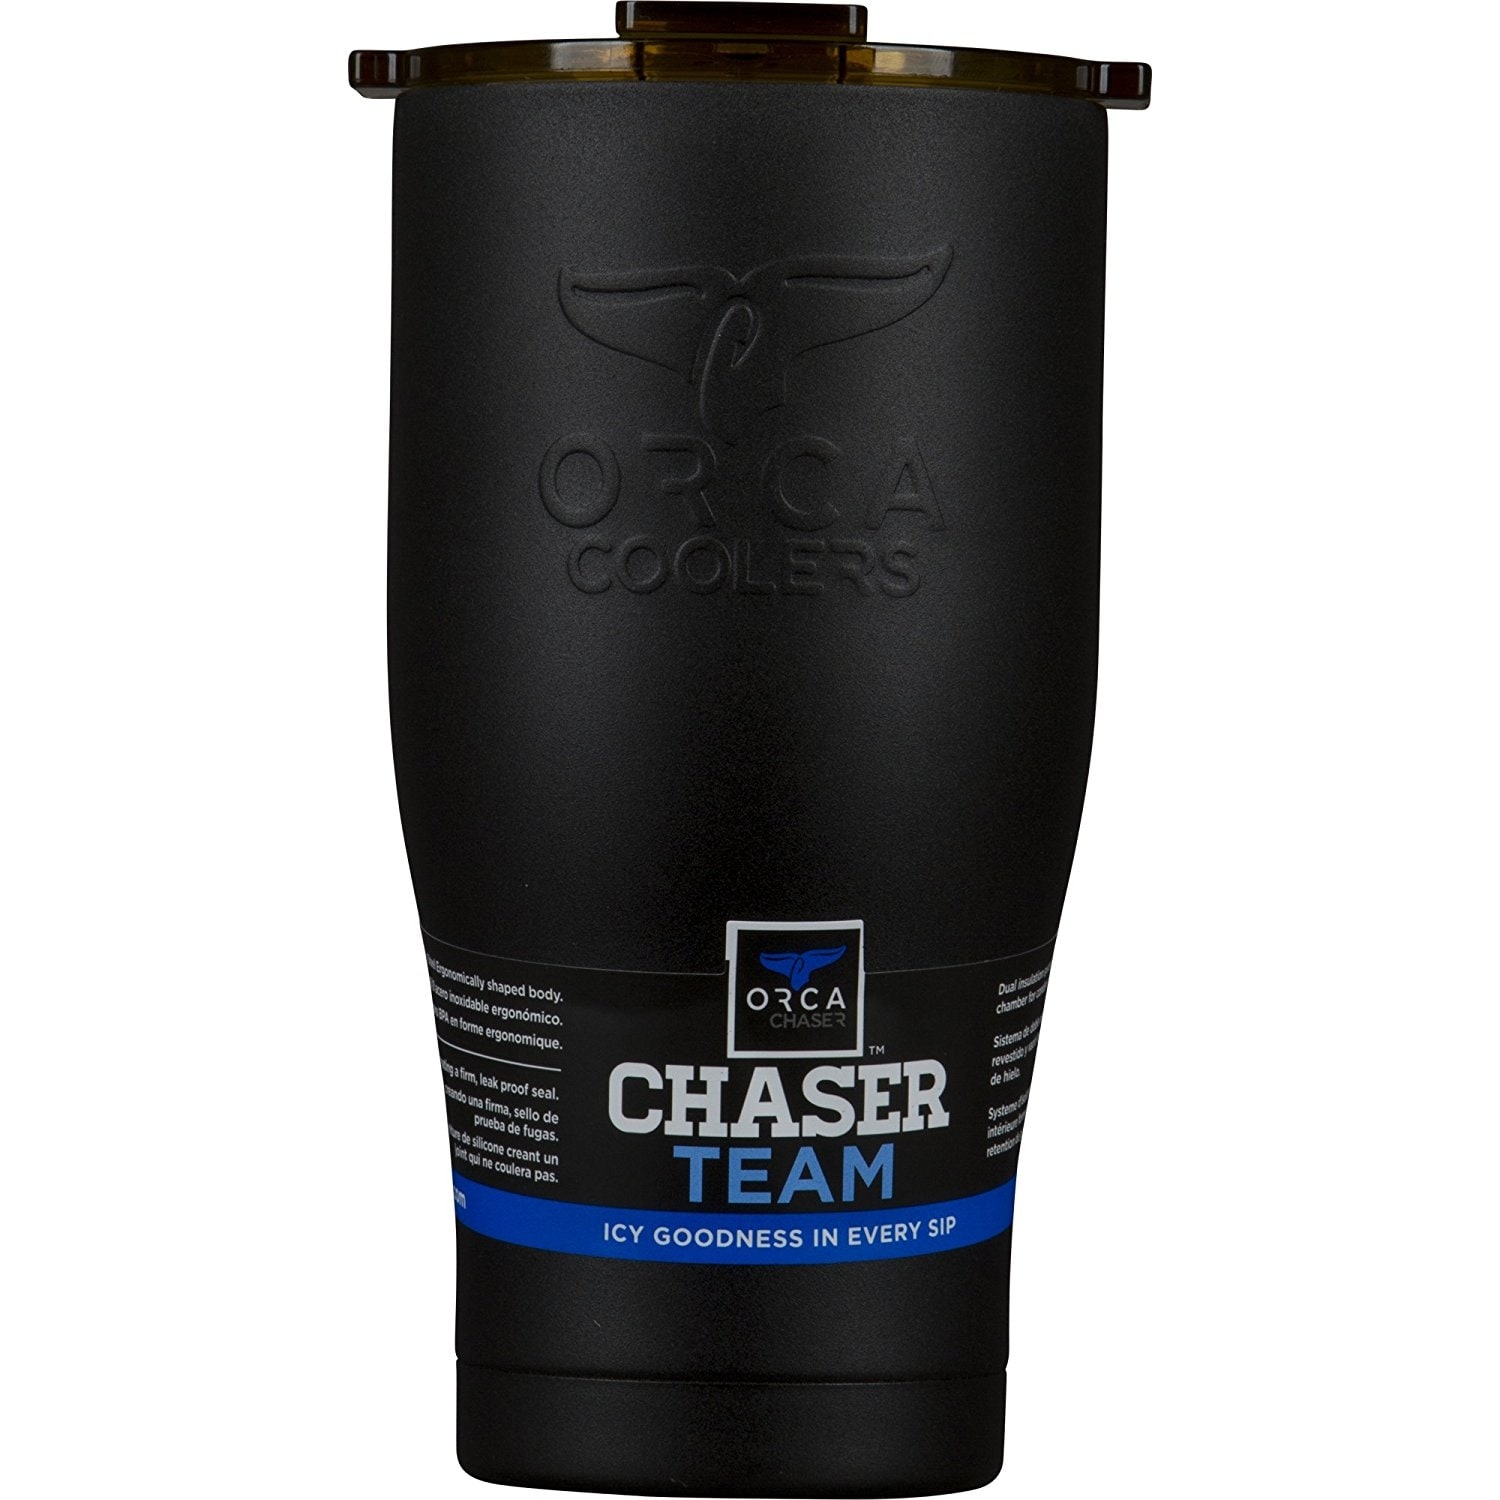 https://ak1.ostkcdn.com/images/products/is/images/direct/fe5e198bfb2e4c3148b14404673cc6c859975ed1/ORCA-ORCCHA27BLK-GO-Chaser-Cup%2C-Black%2C-27-Oz.jpg